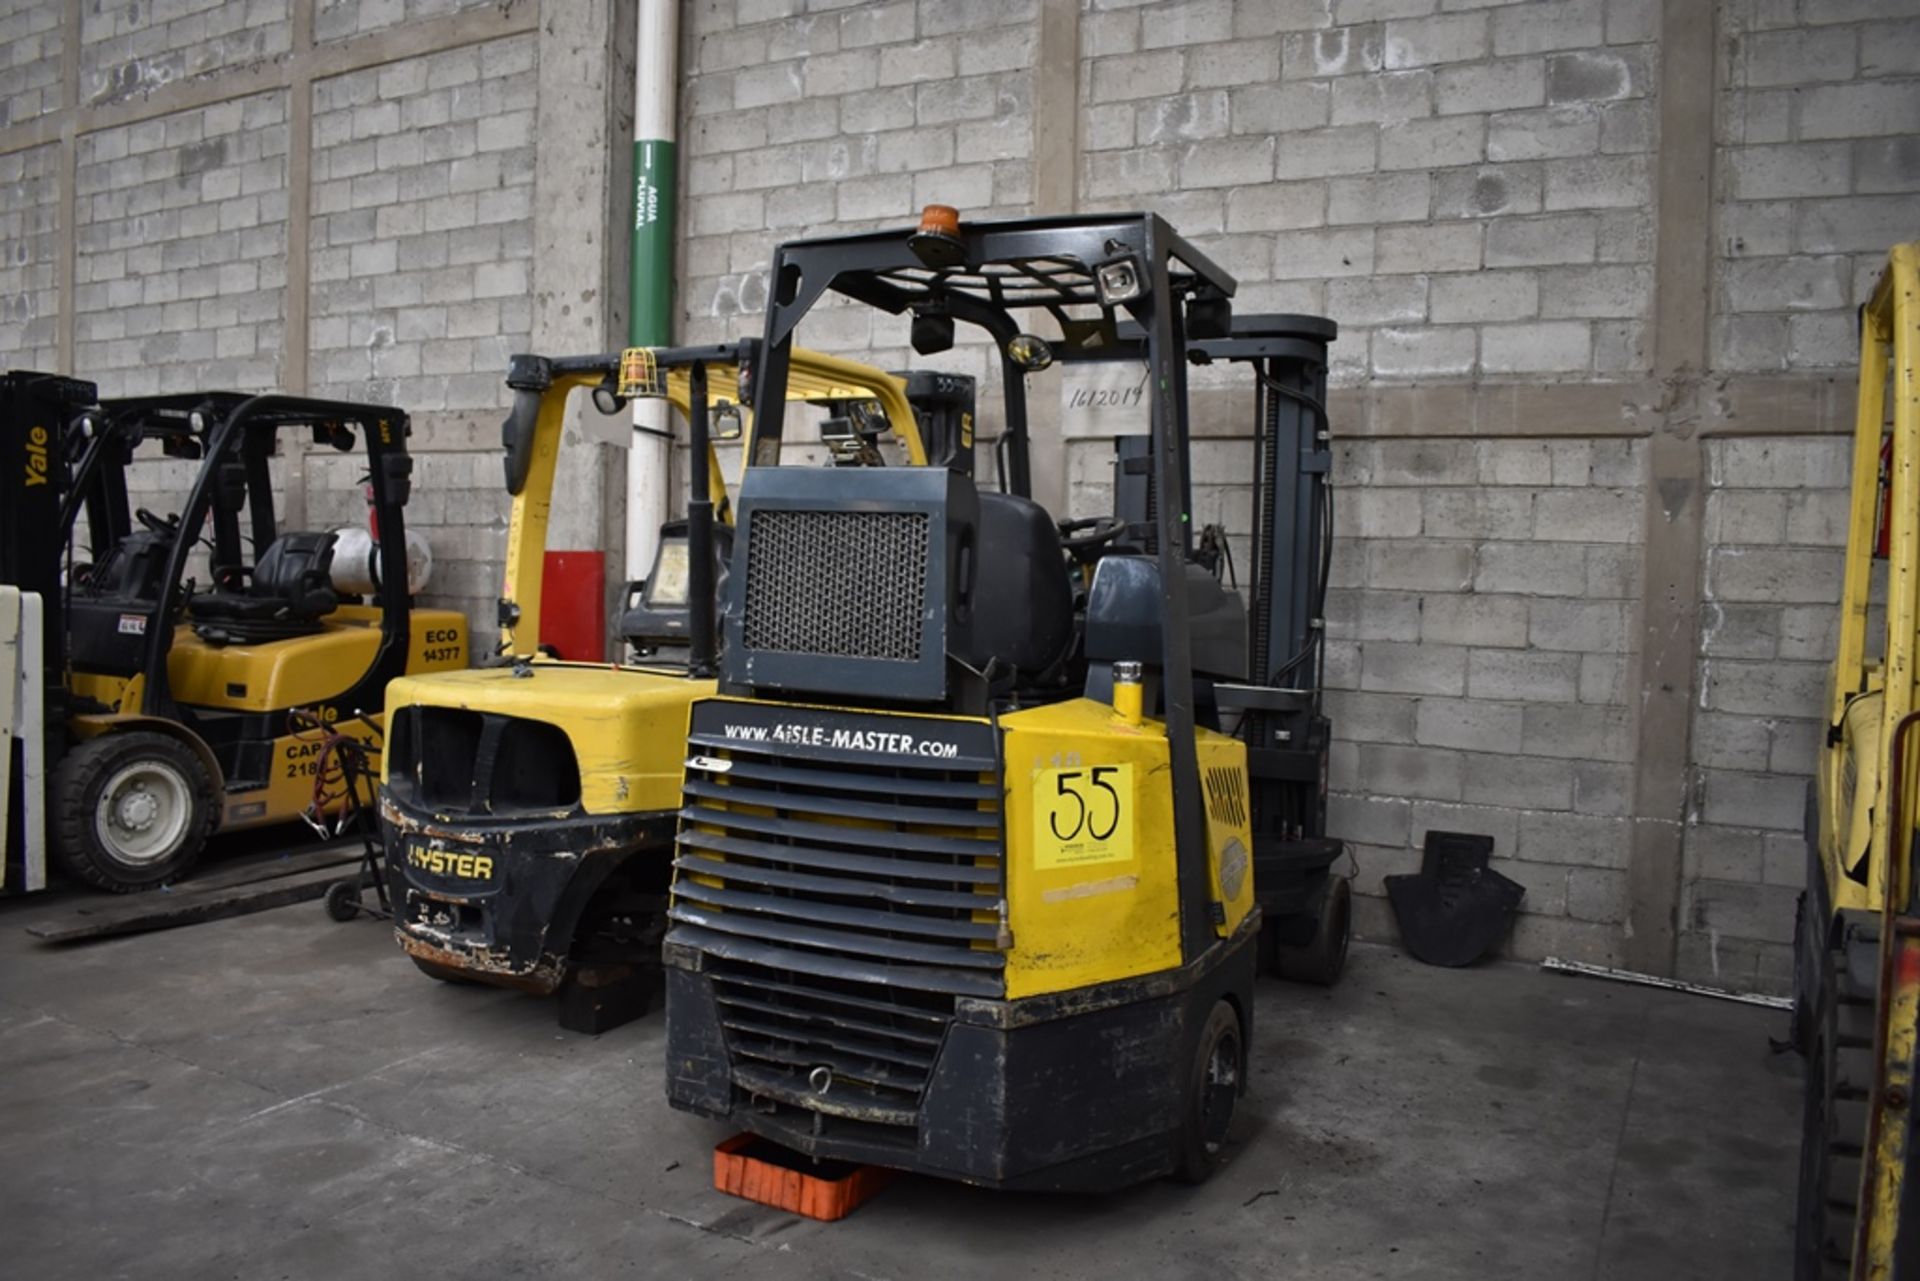 Aisle-master Forklift, model 20S, 2 tons capacity - Image 5 of 50